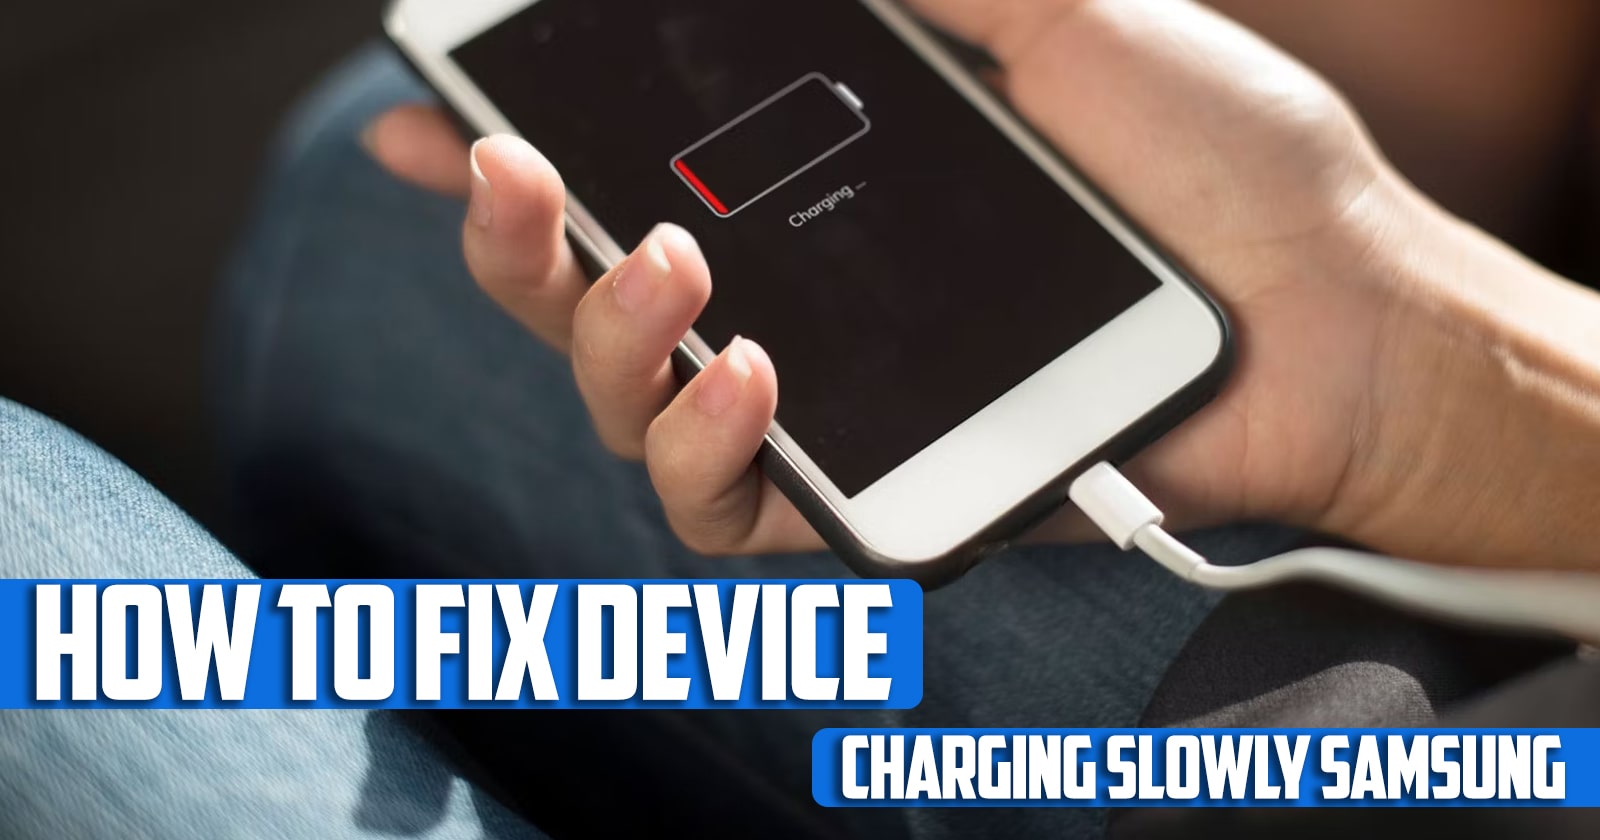 How to Fix Device Charging Slowly Samsung